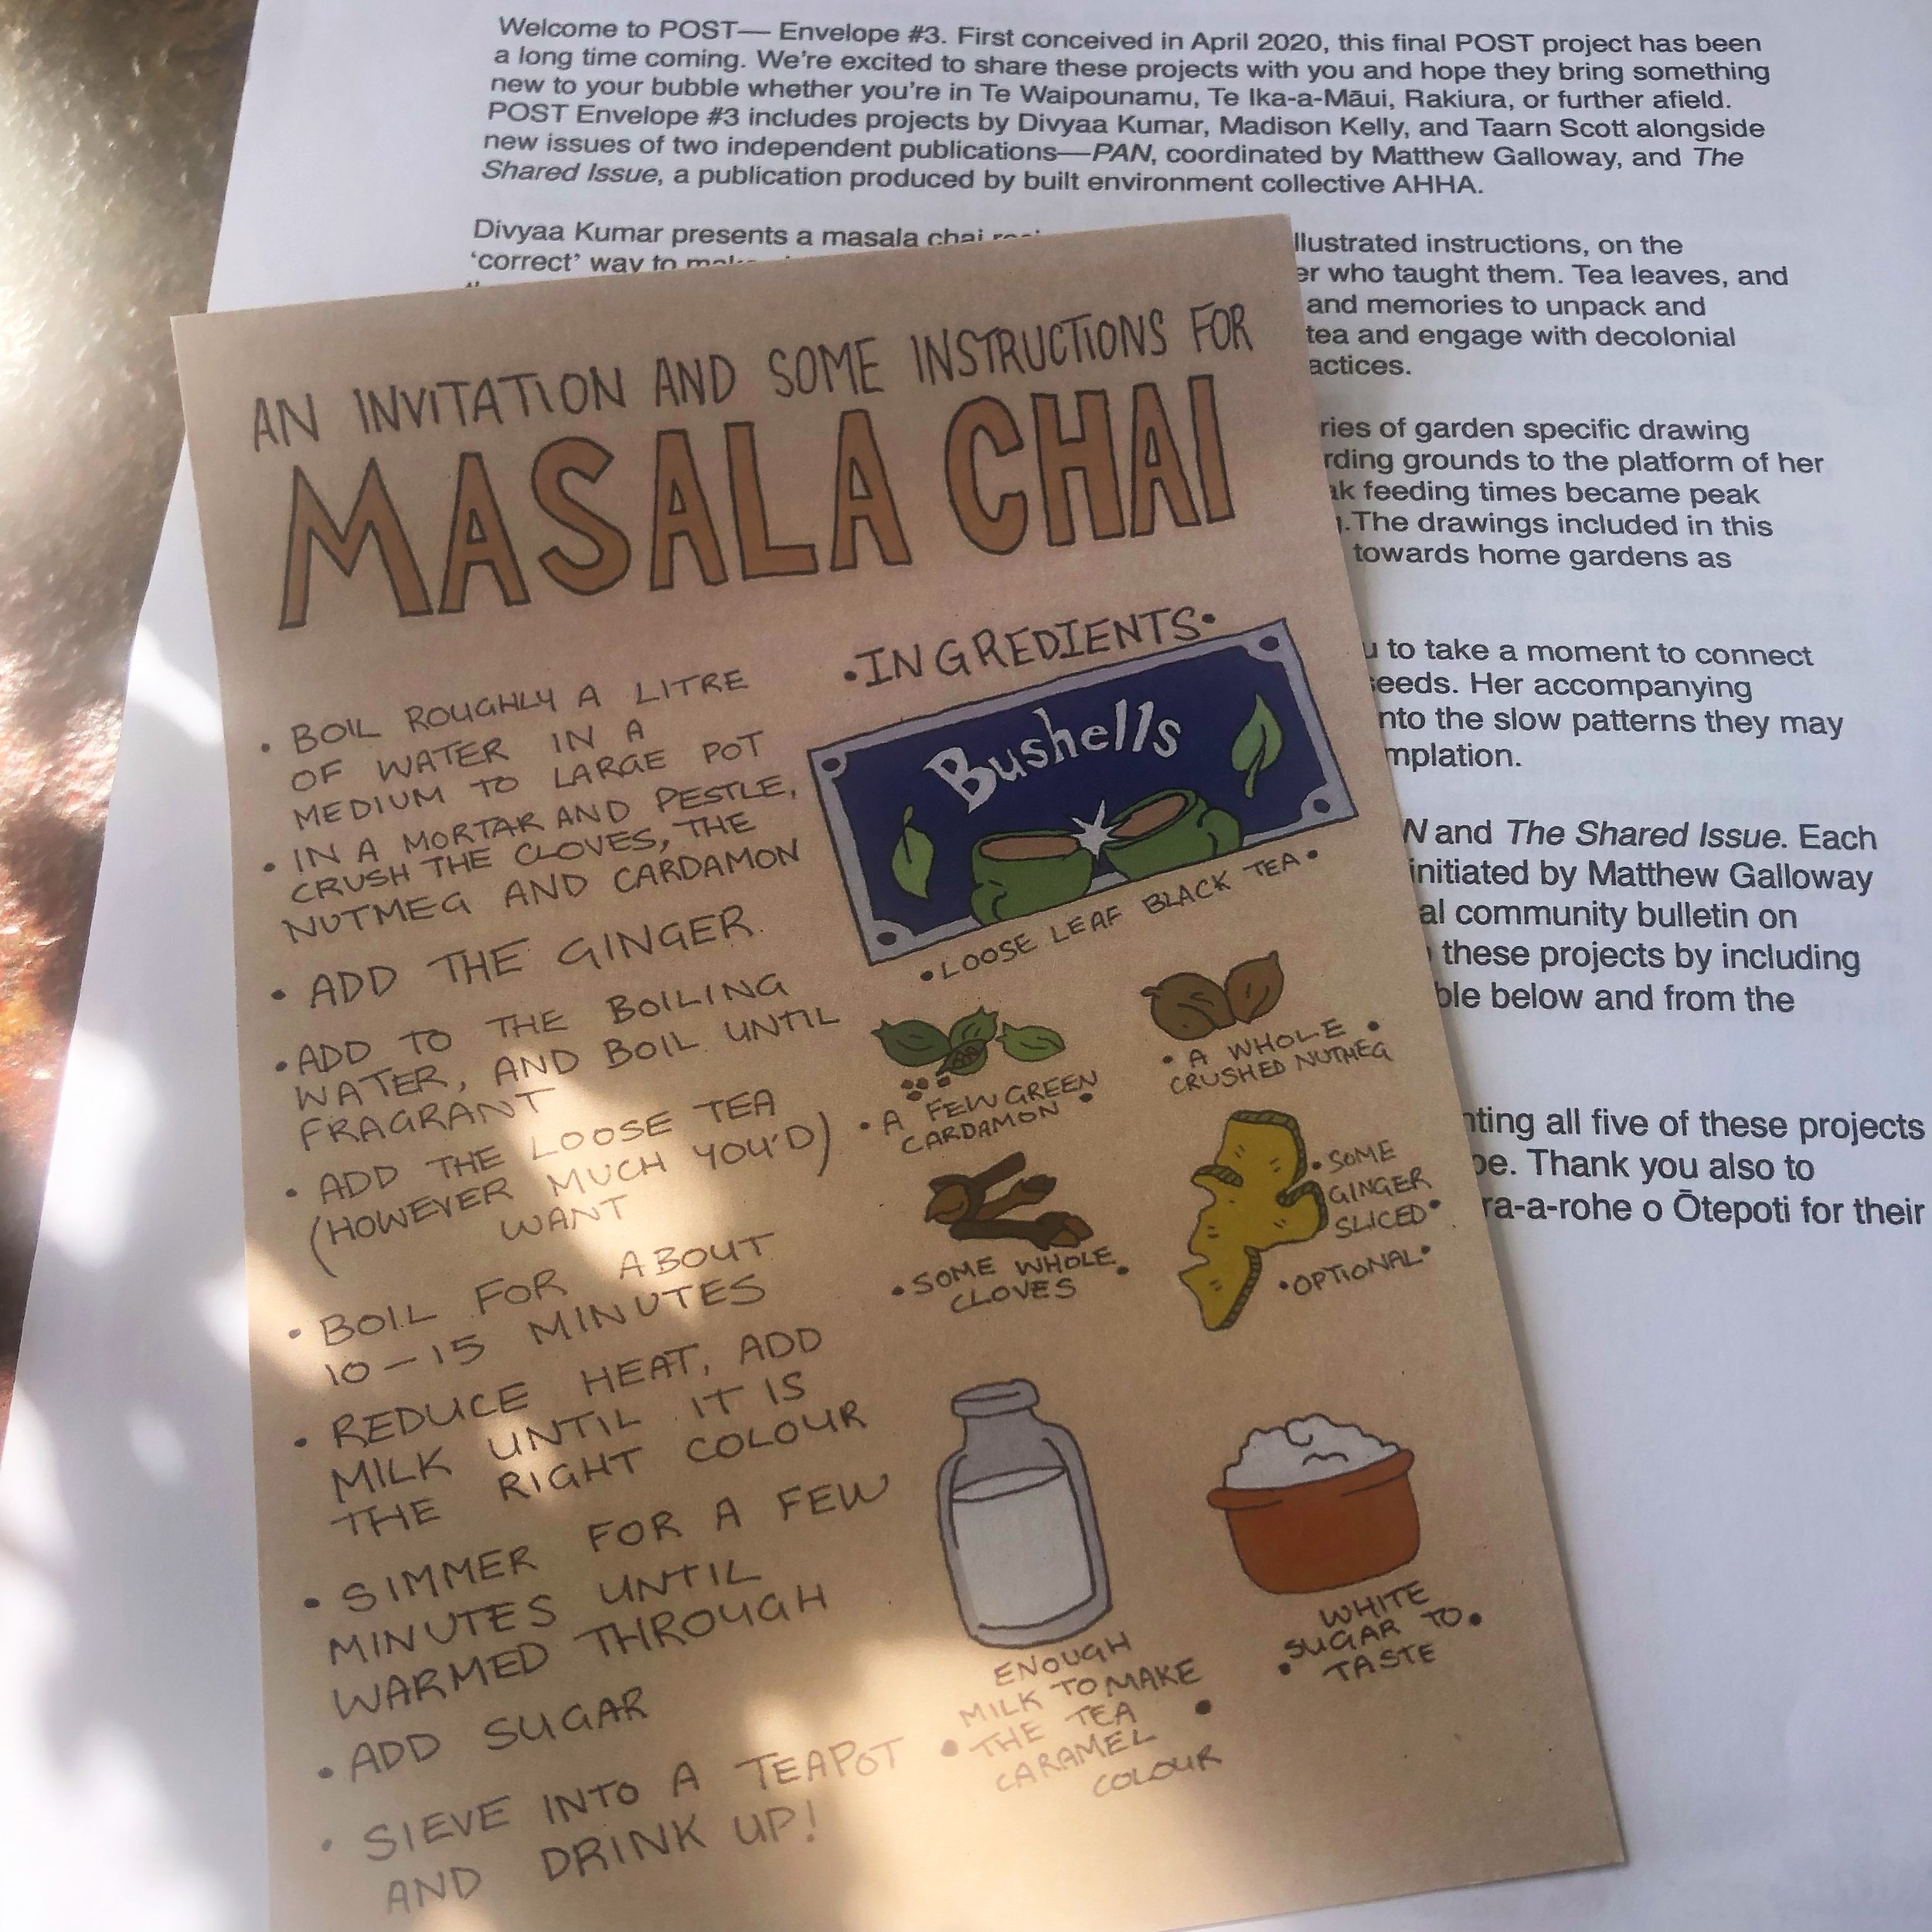   An Invitation and Some Instructions for Masala Chai,  Envelope #3 for Blue Oyster Gallery's  POST- project, 2020  